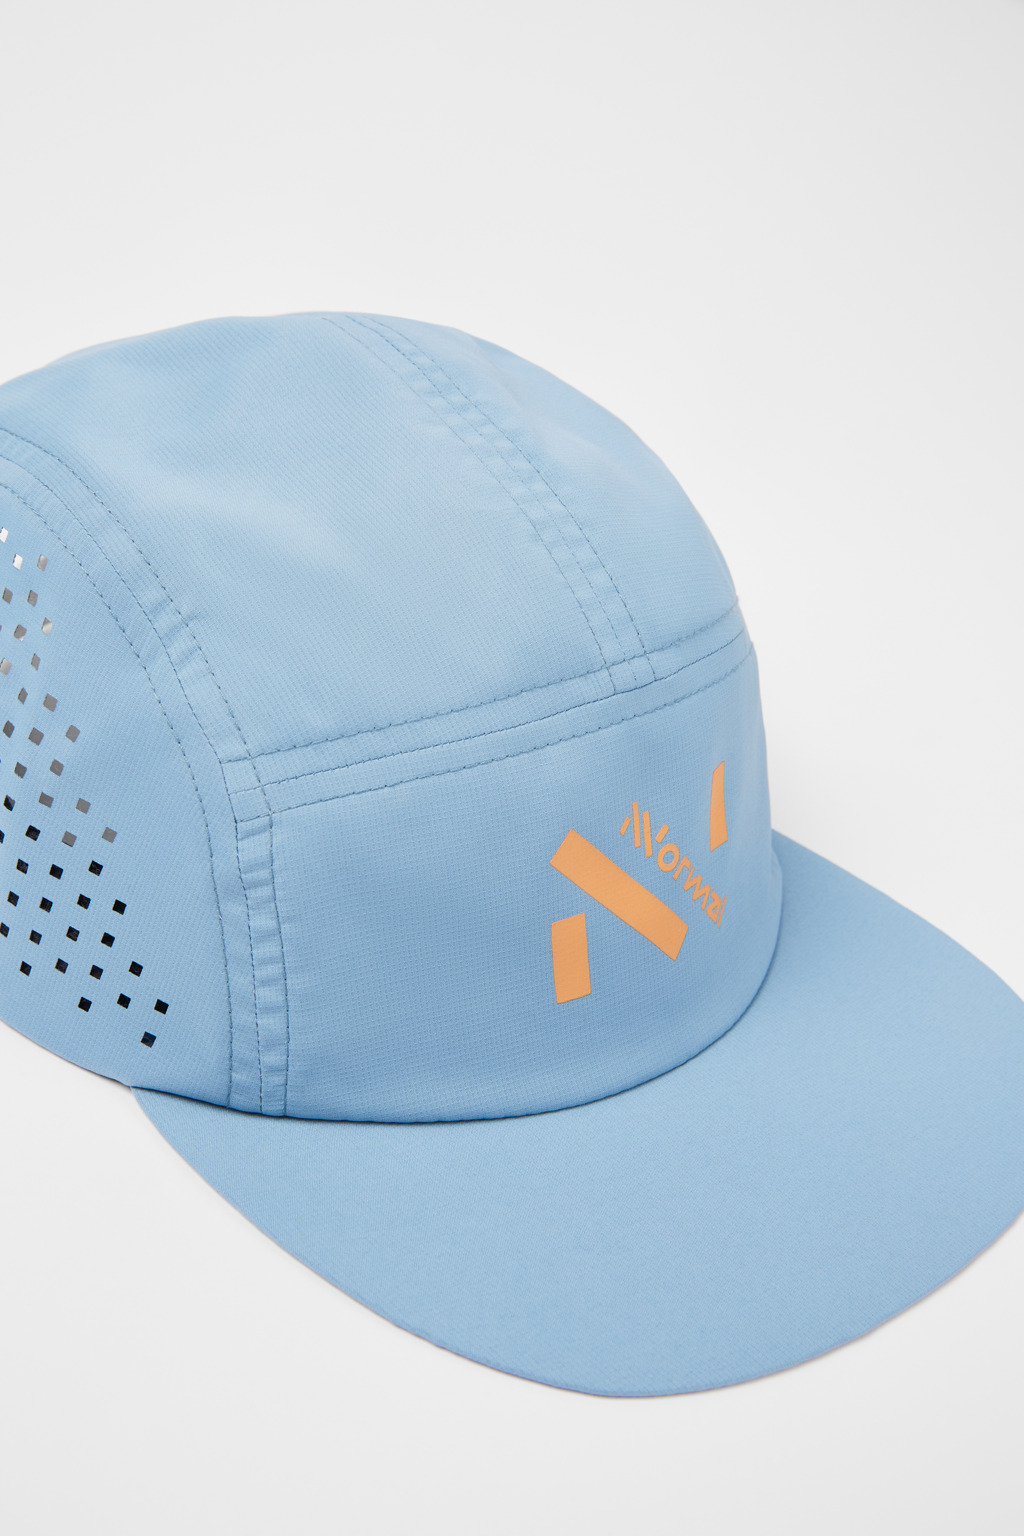 Race Cap by Nnormal